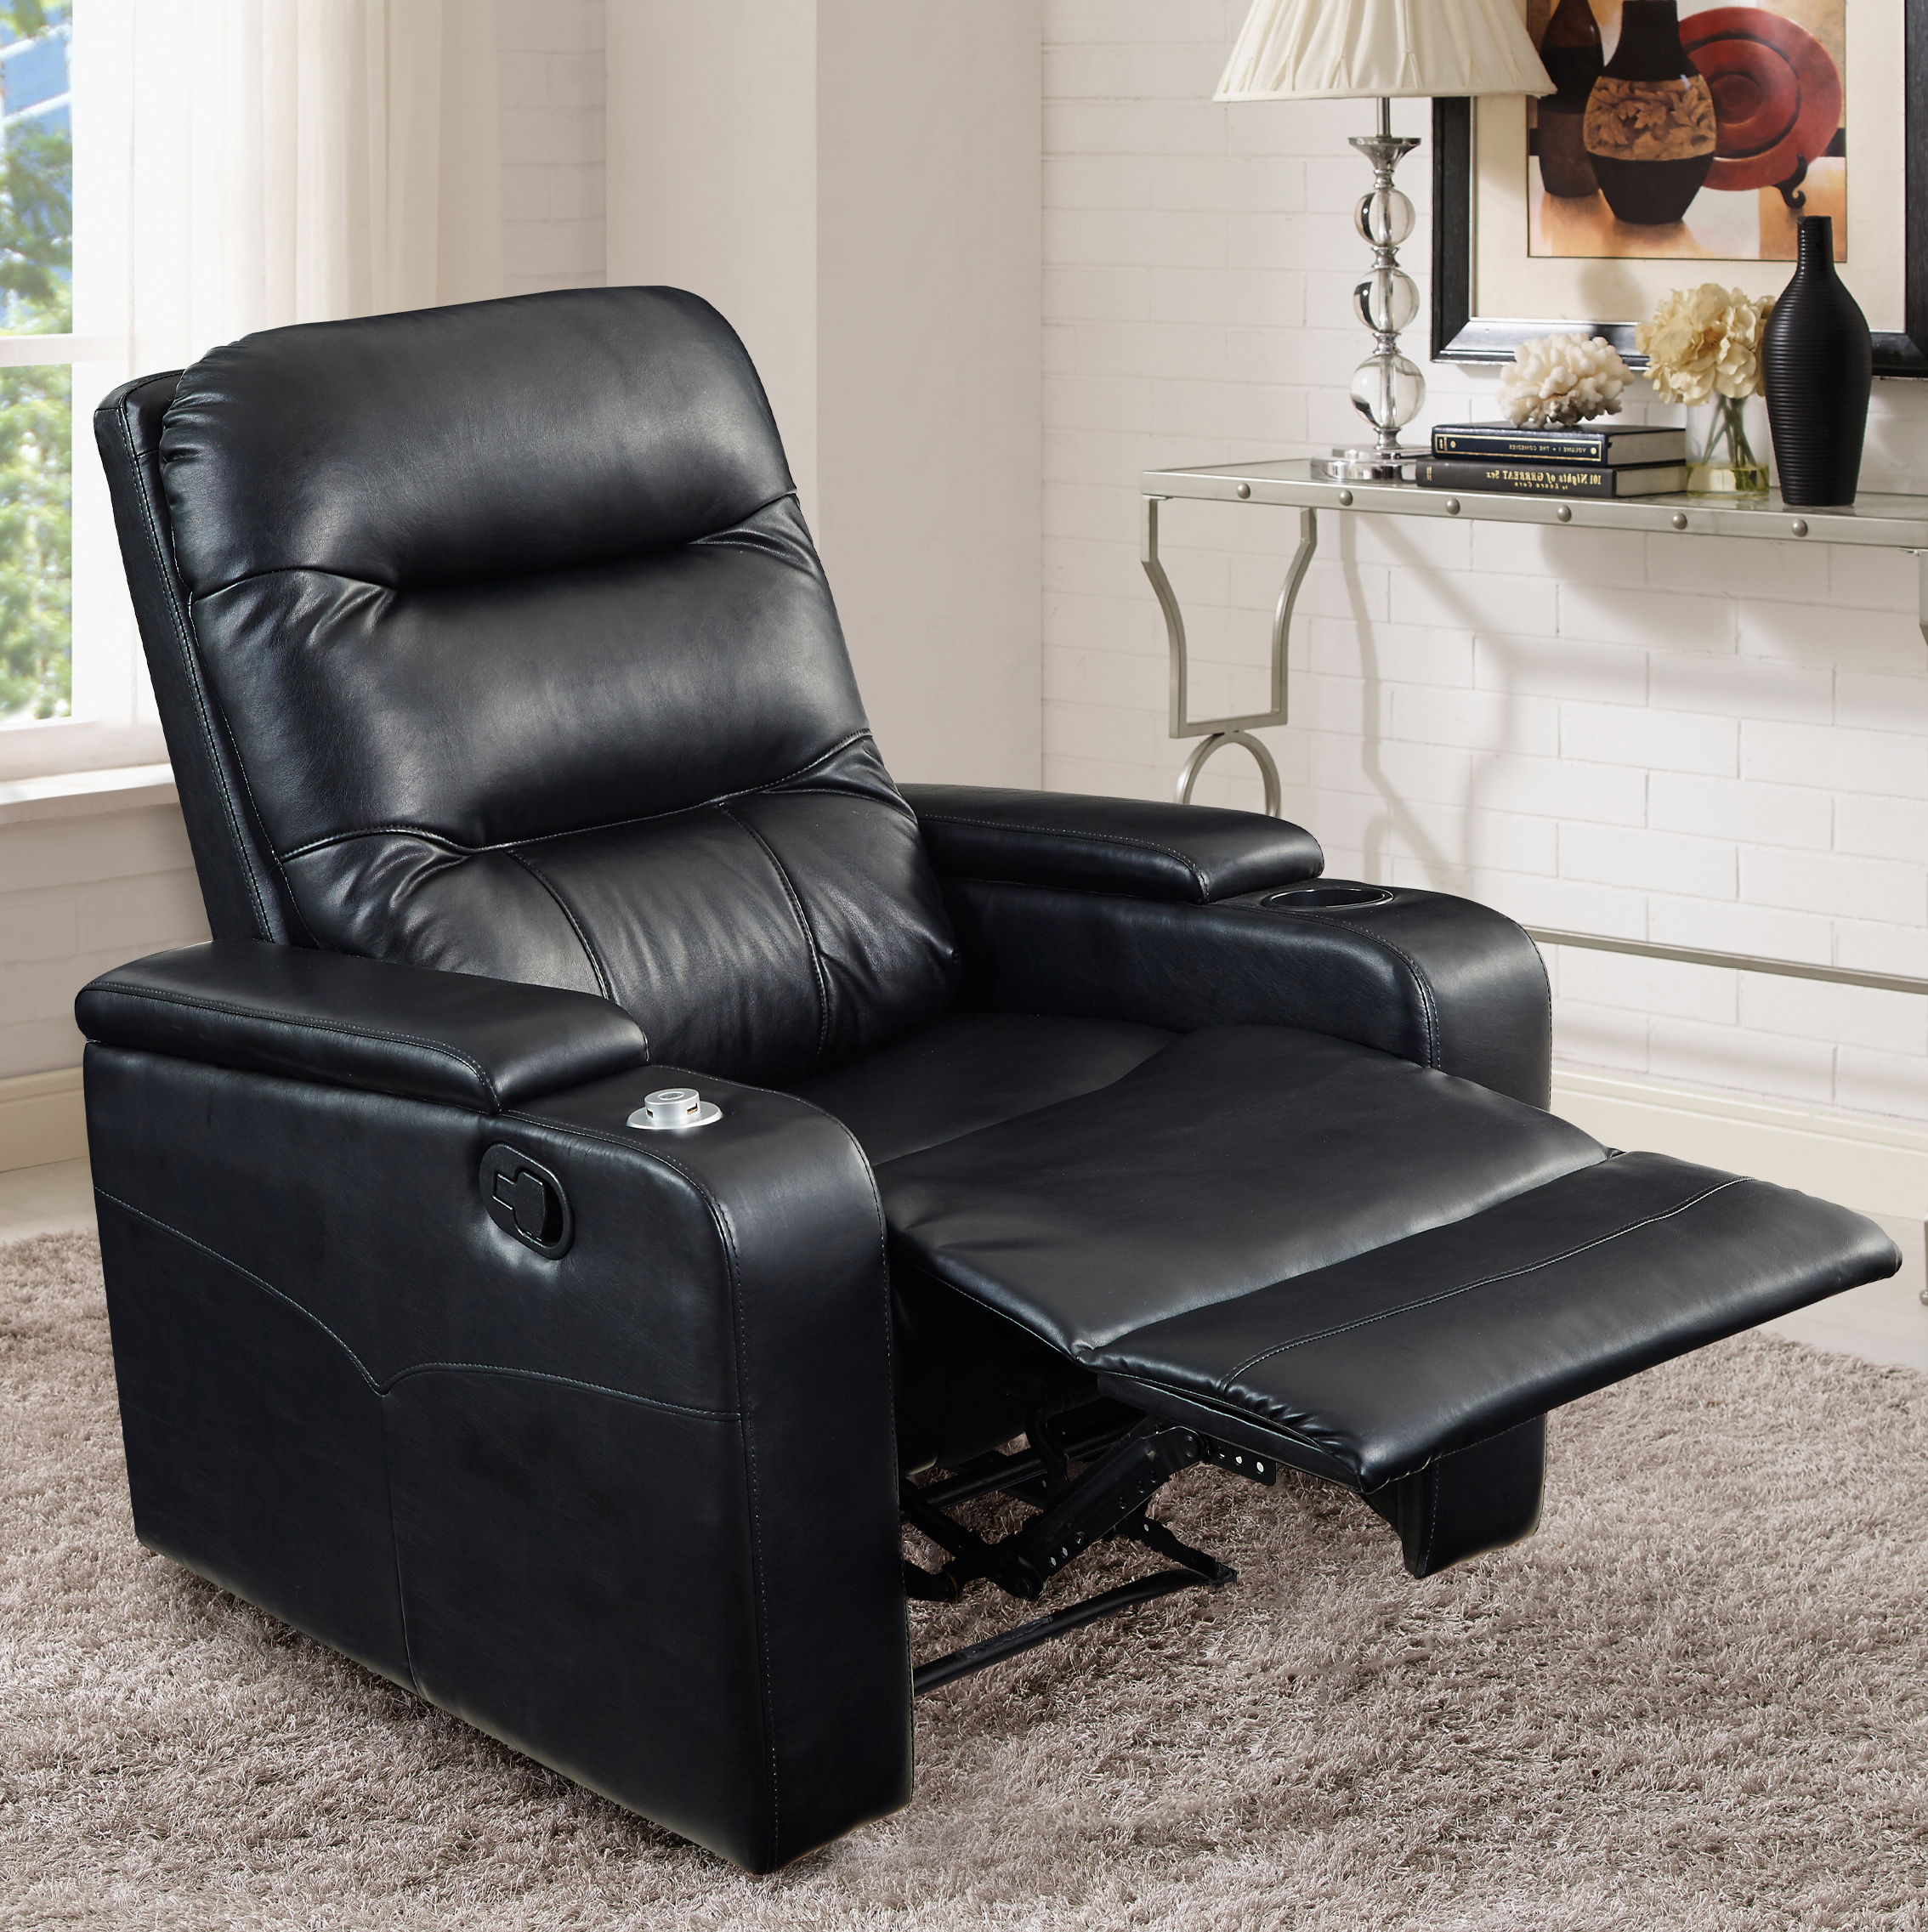 Relax-a-Lounger Lilac Manual Standard Recliner, Black Fabric - image 5 of 16